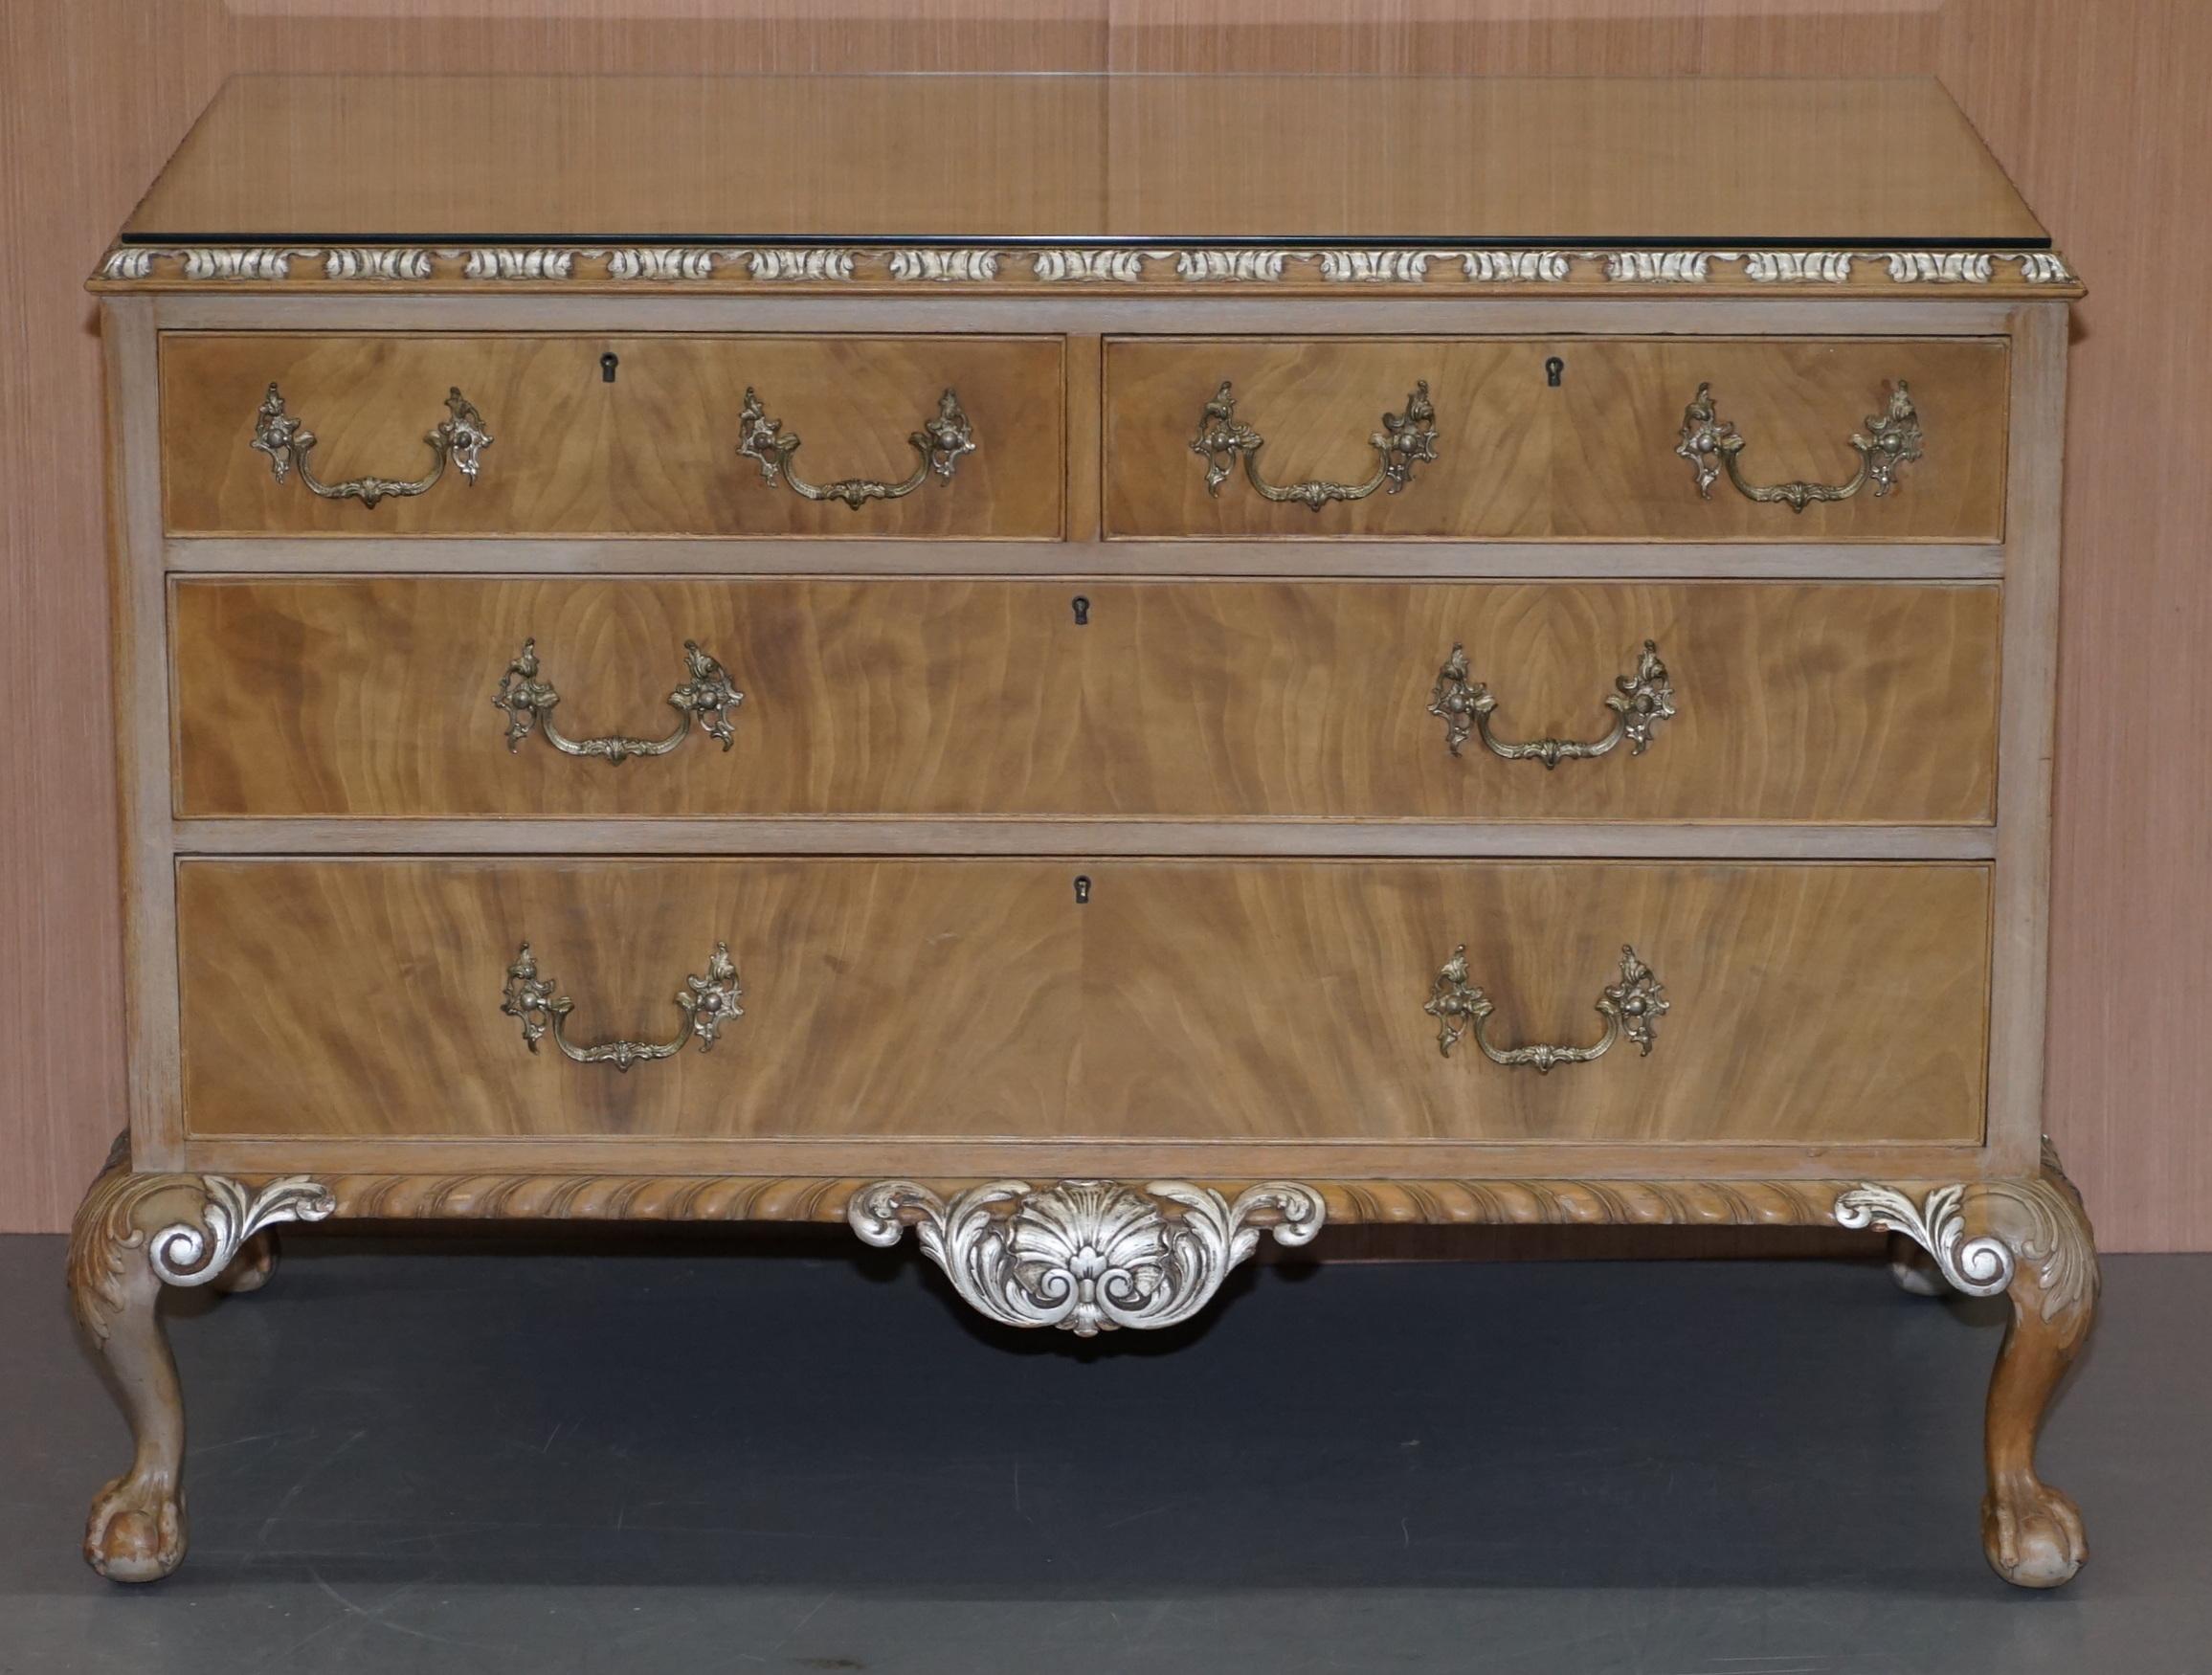 We are delighted to this lovely Gillows Walnut chest of drawers with ornately carved Claw & Ball legs

As mentioned this is part of a suite, I have the matching side tables and a stunning dressing table listed under my other items. The dressing